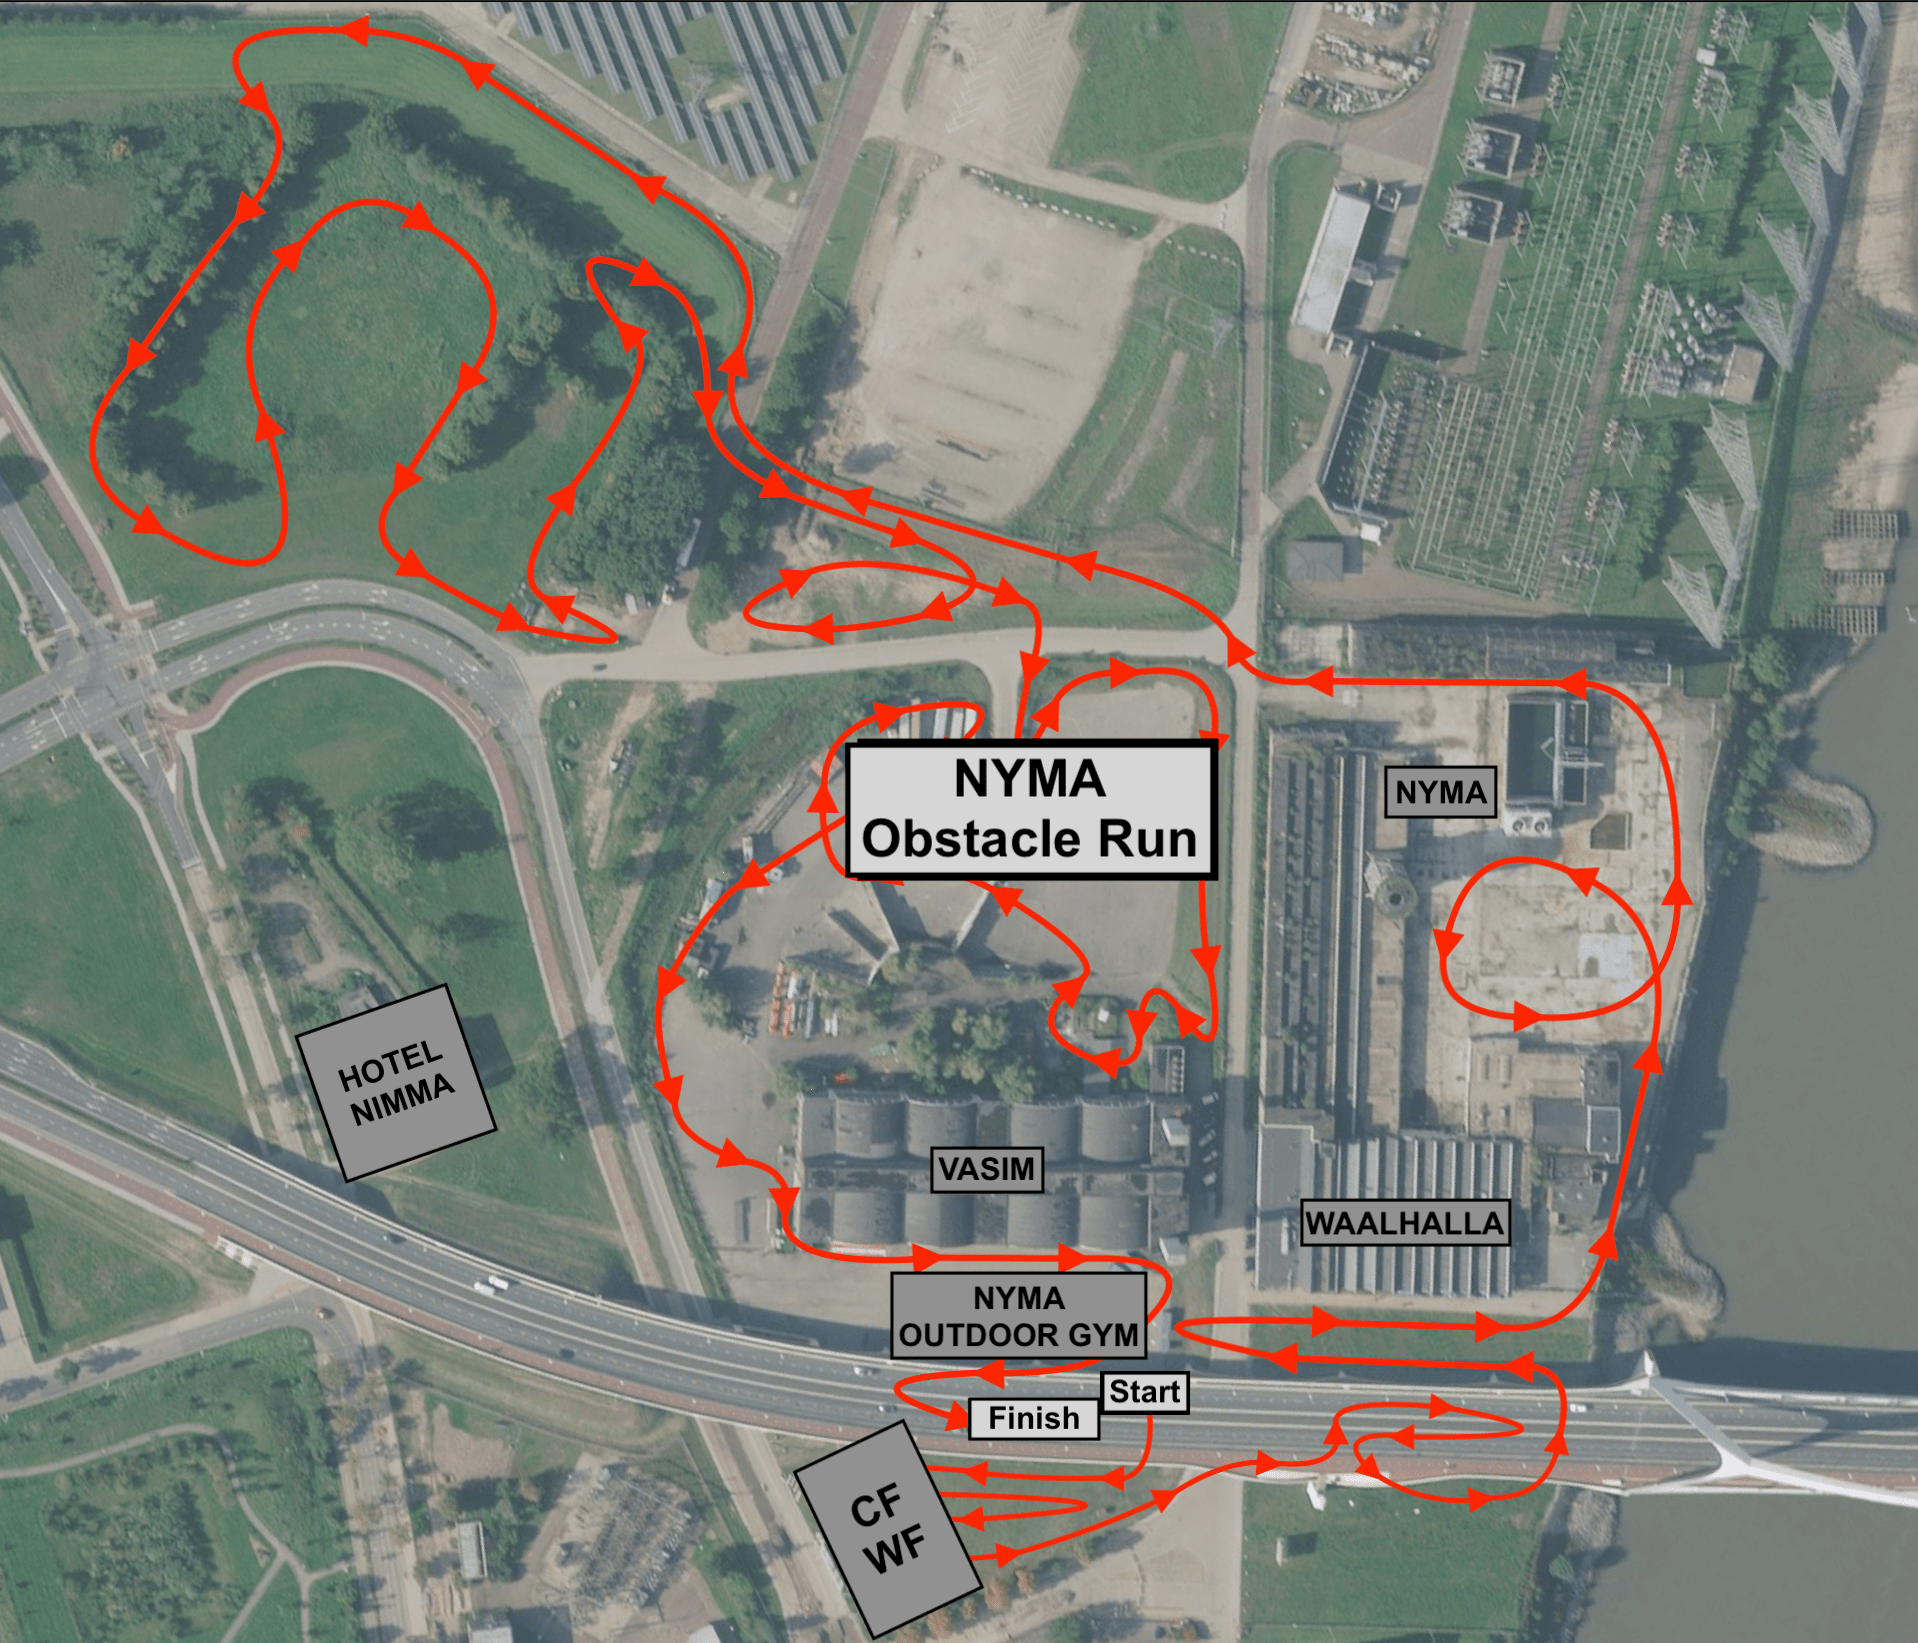 NYMA Obstacle Run - Route